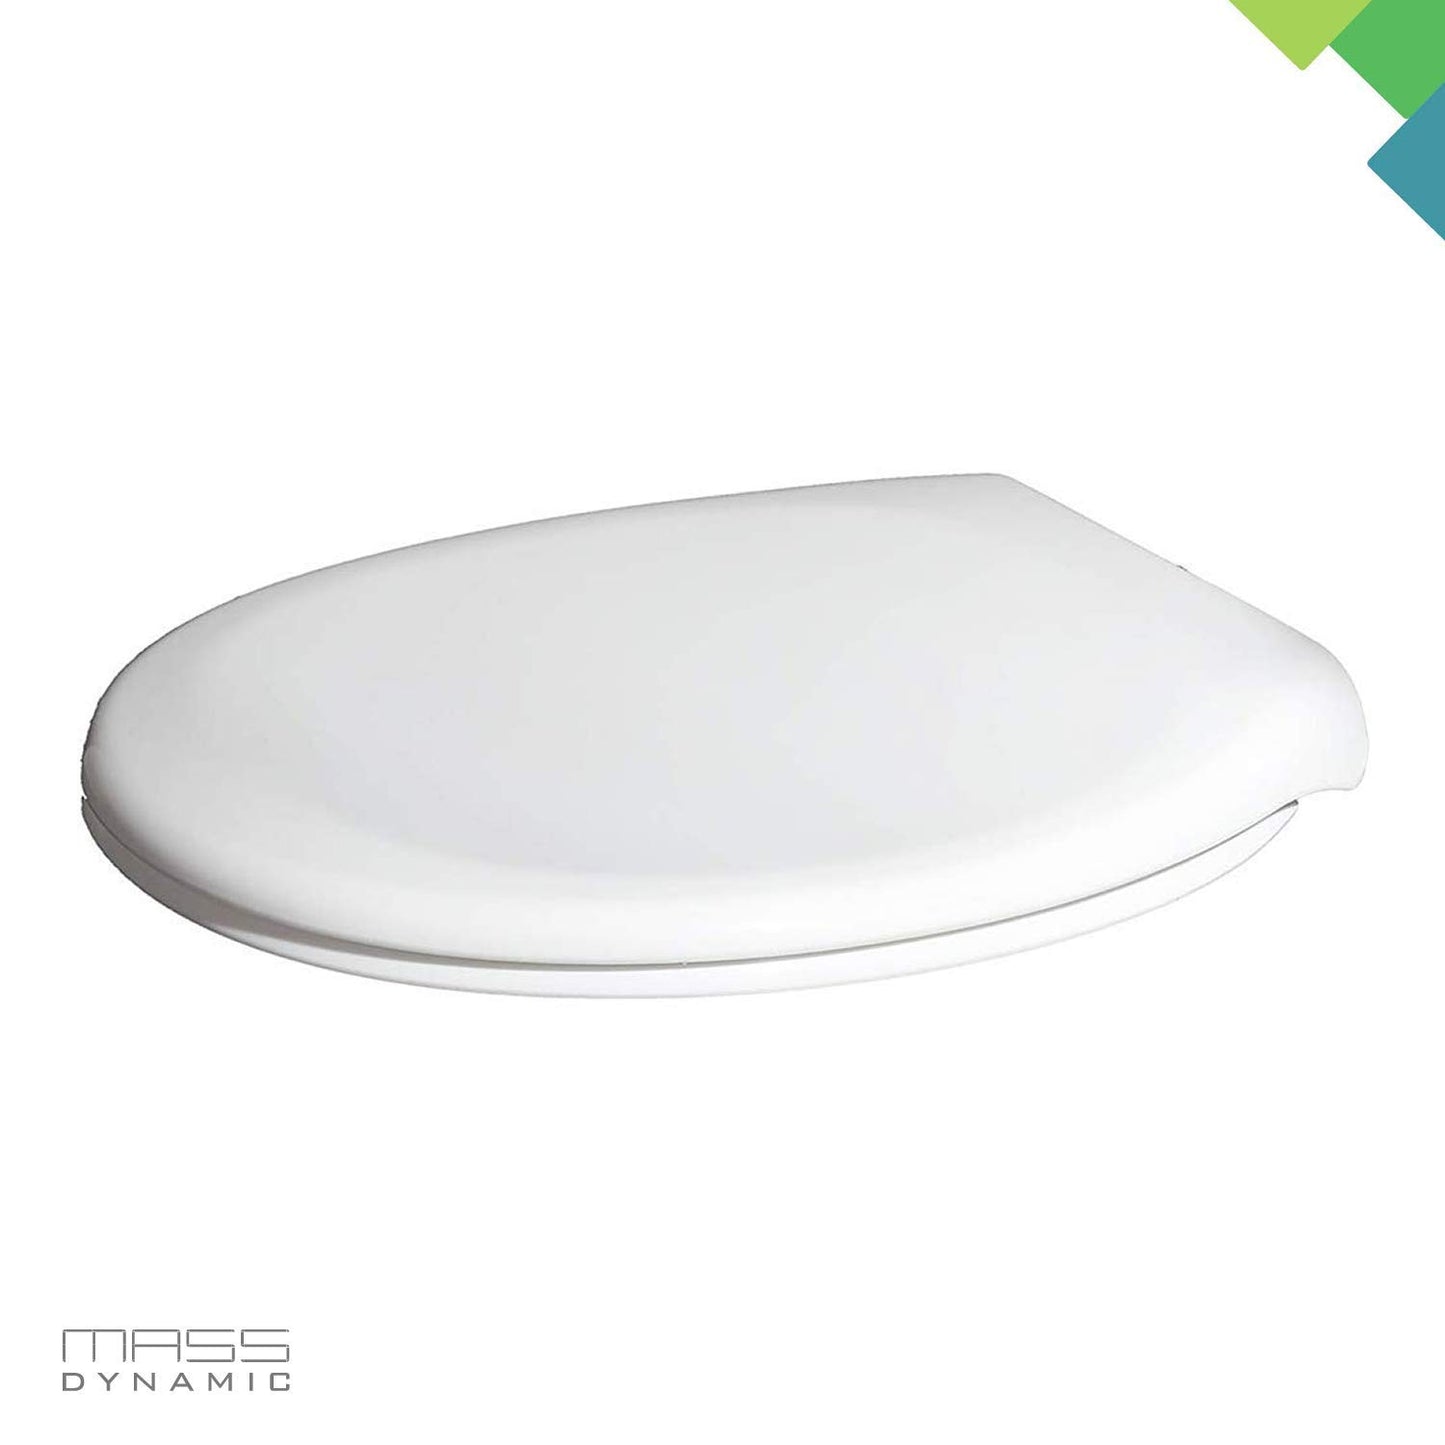 Oval Shape Toilet Seat, Soft-Close Easy Clean, Top Fixing Hinges